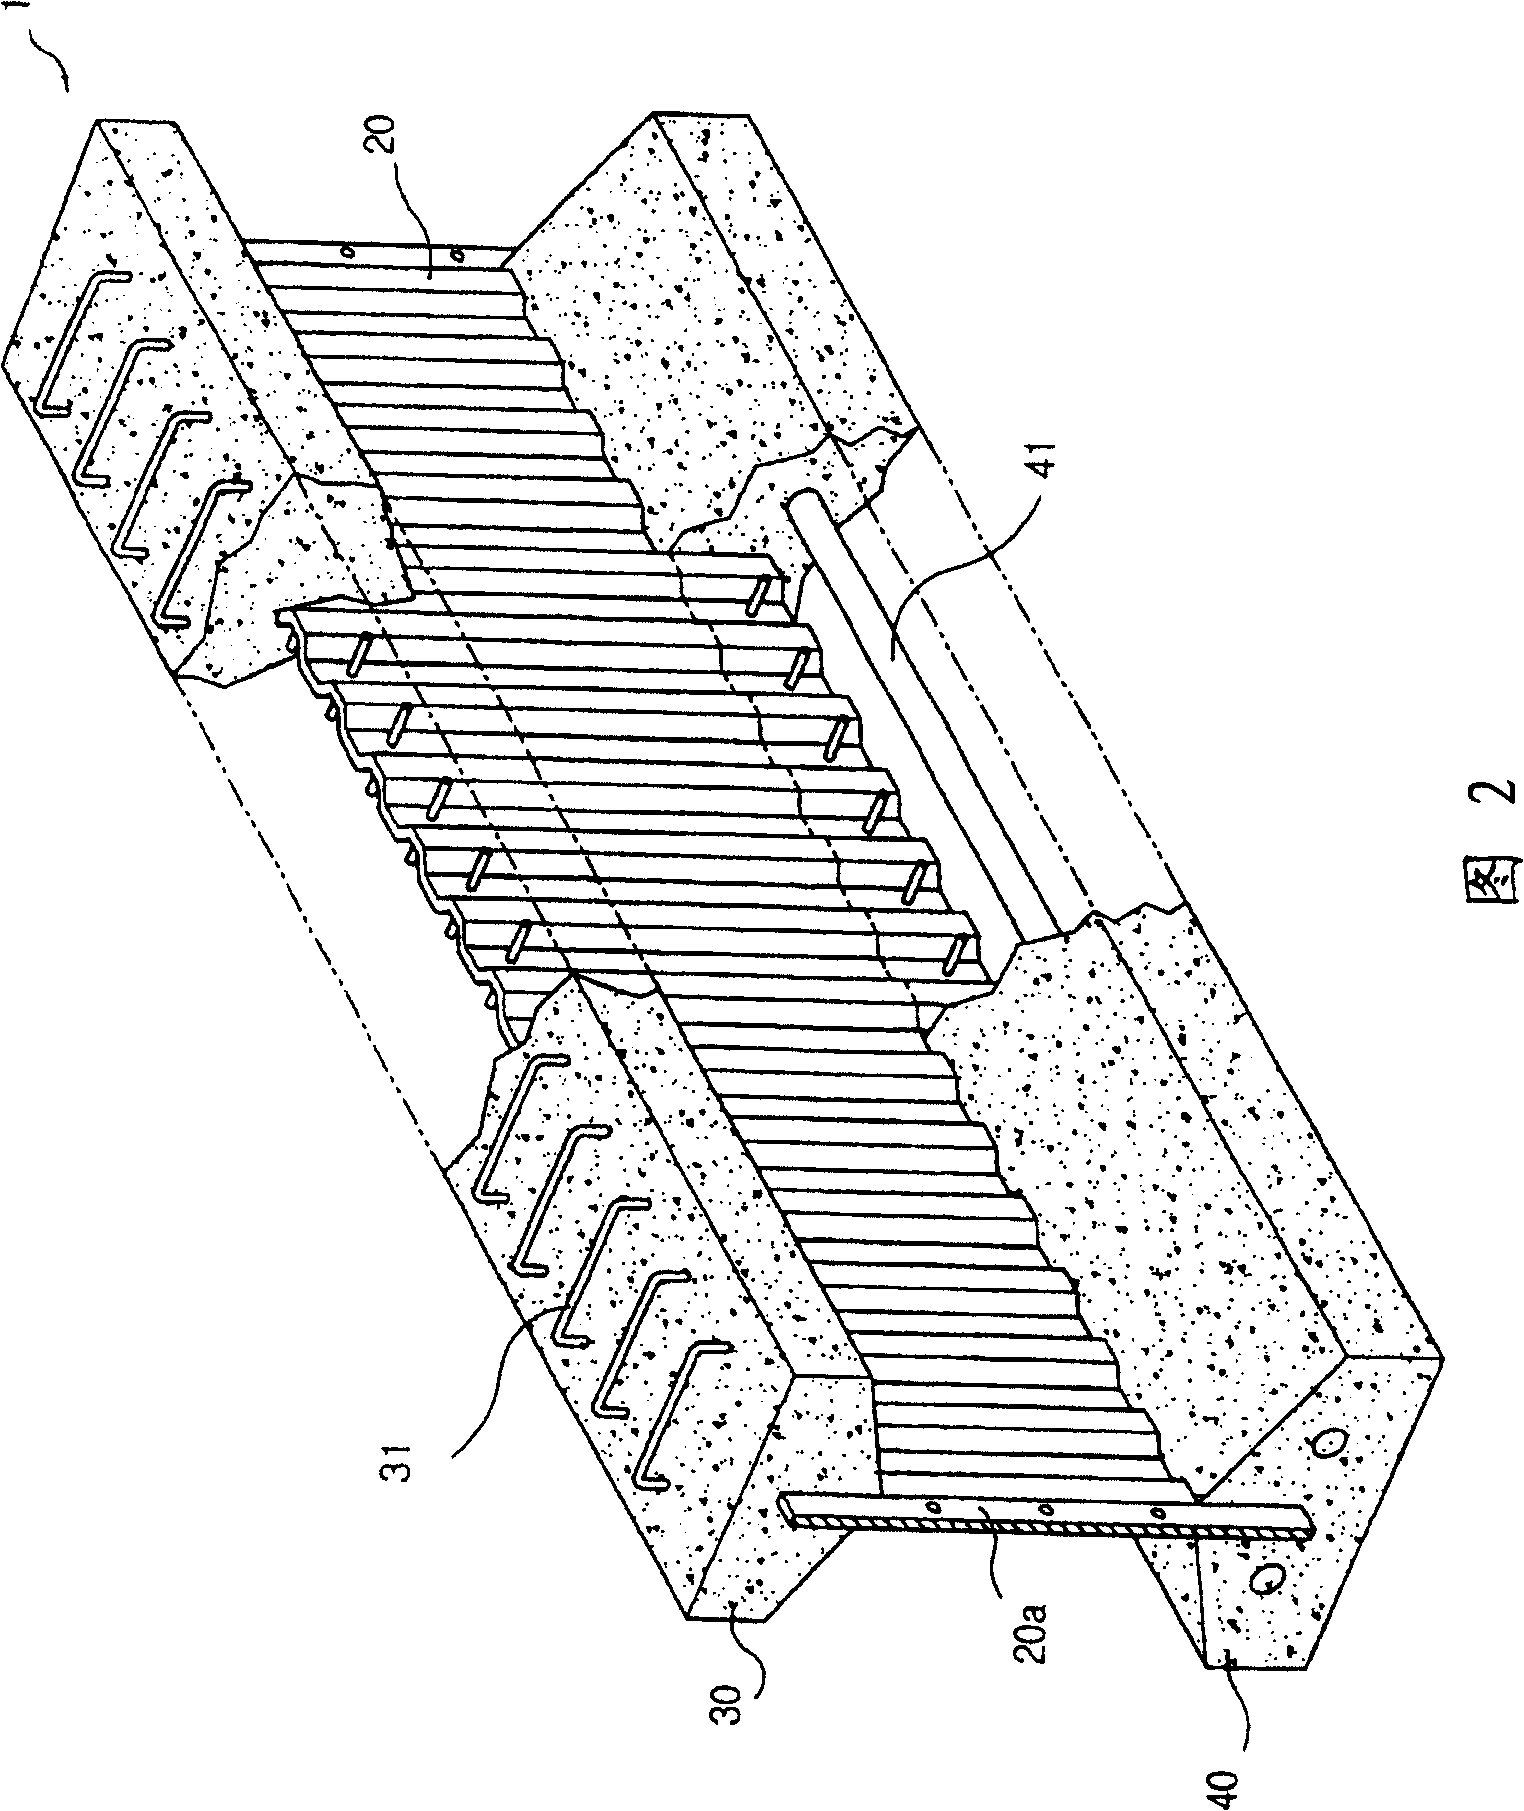 Prestress mixed beam with concrete plate and corrugate steel web beam